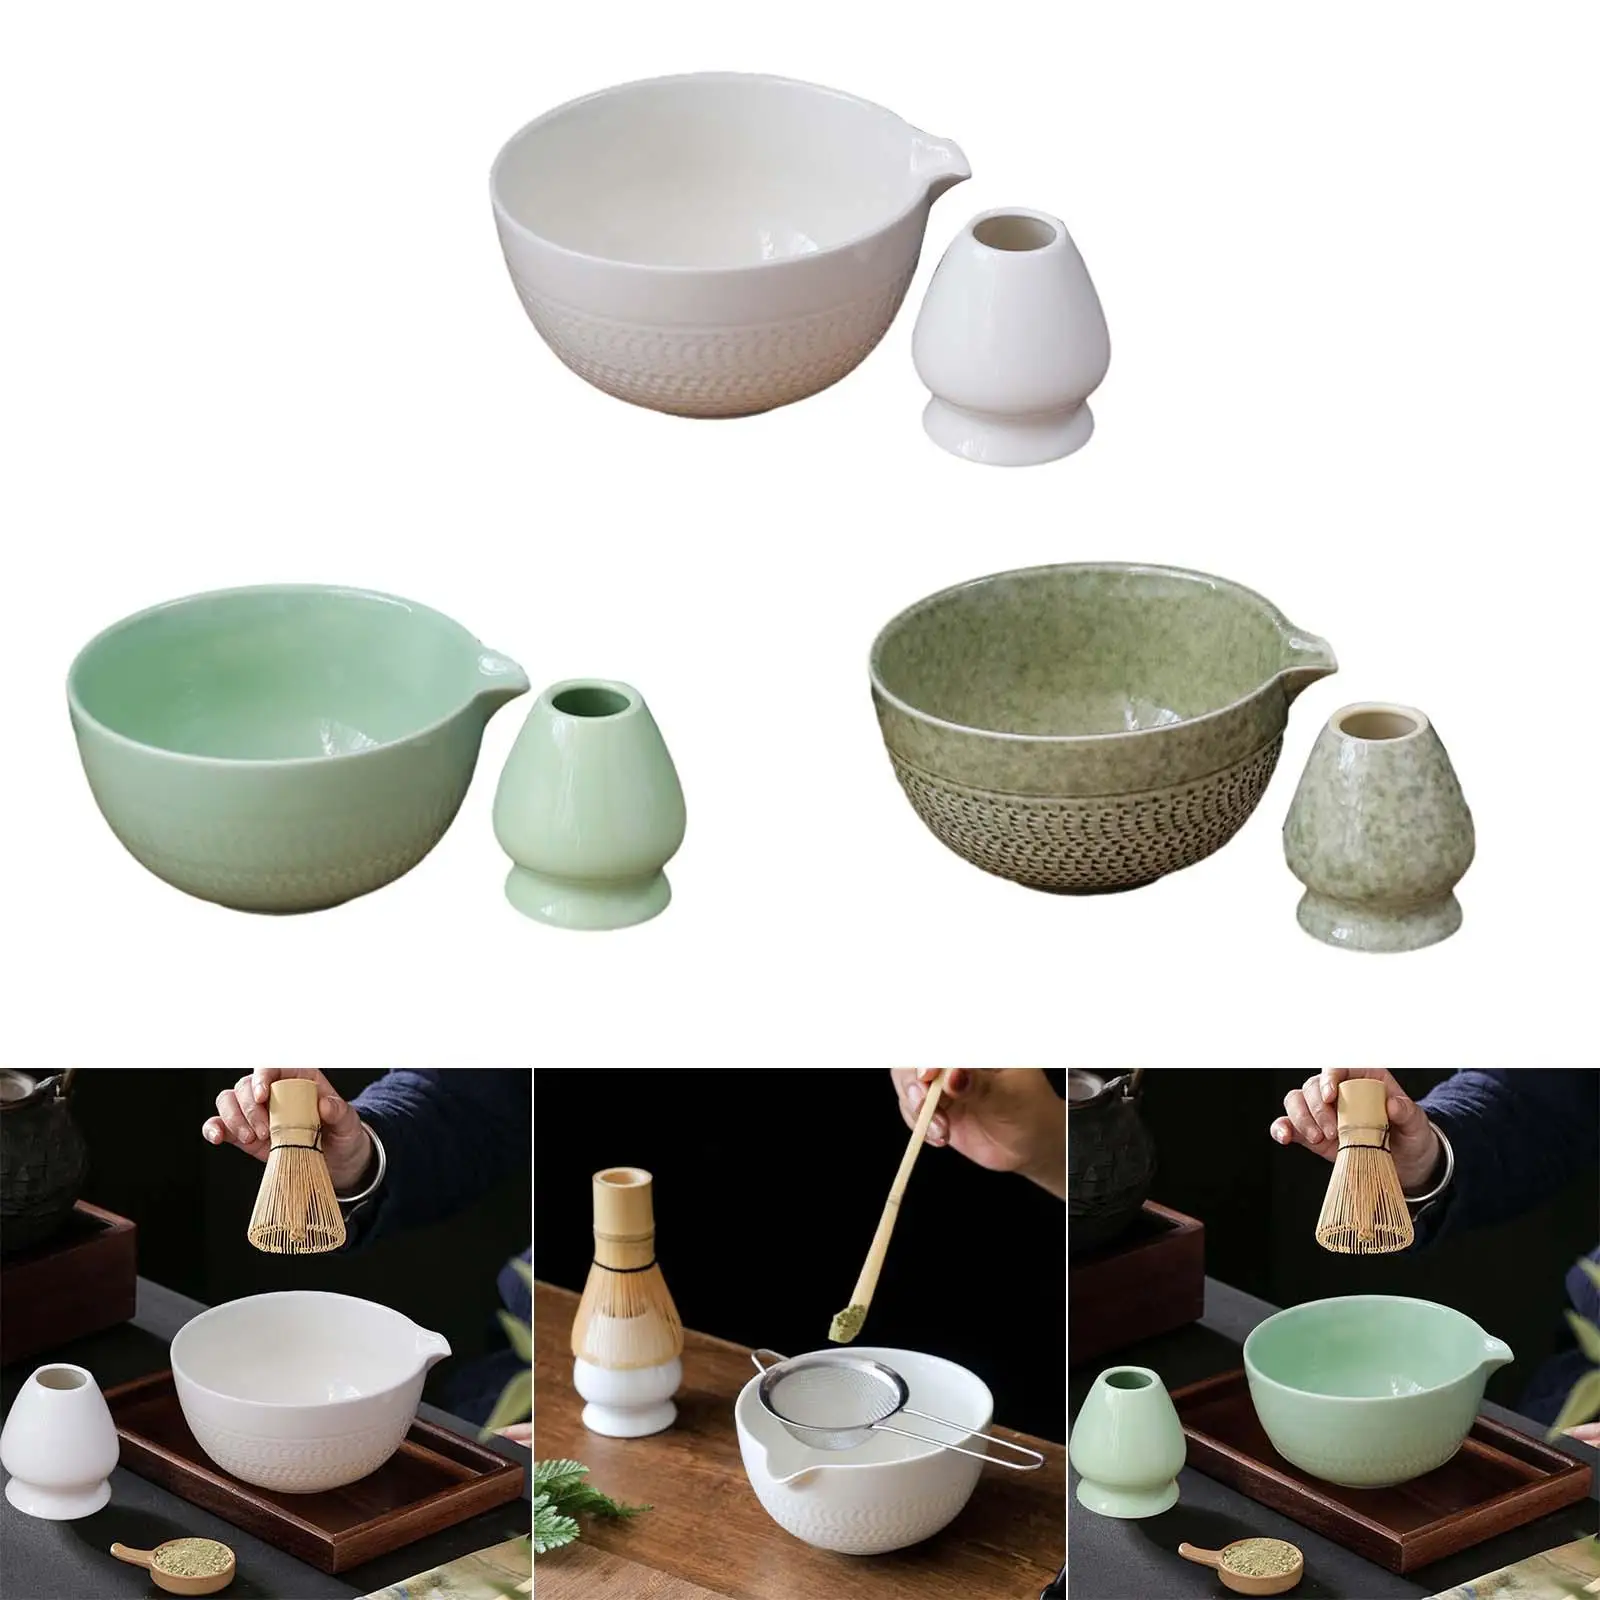 2x Traditional Japanese Matcha Bowl with Whisk Holder 500ml Matcha Ceramic Bowl for Holiday Traditional Ceremonial Office Home